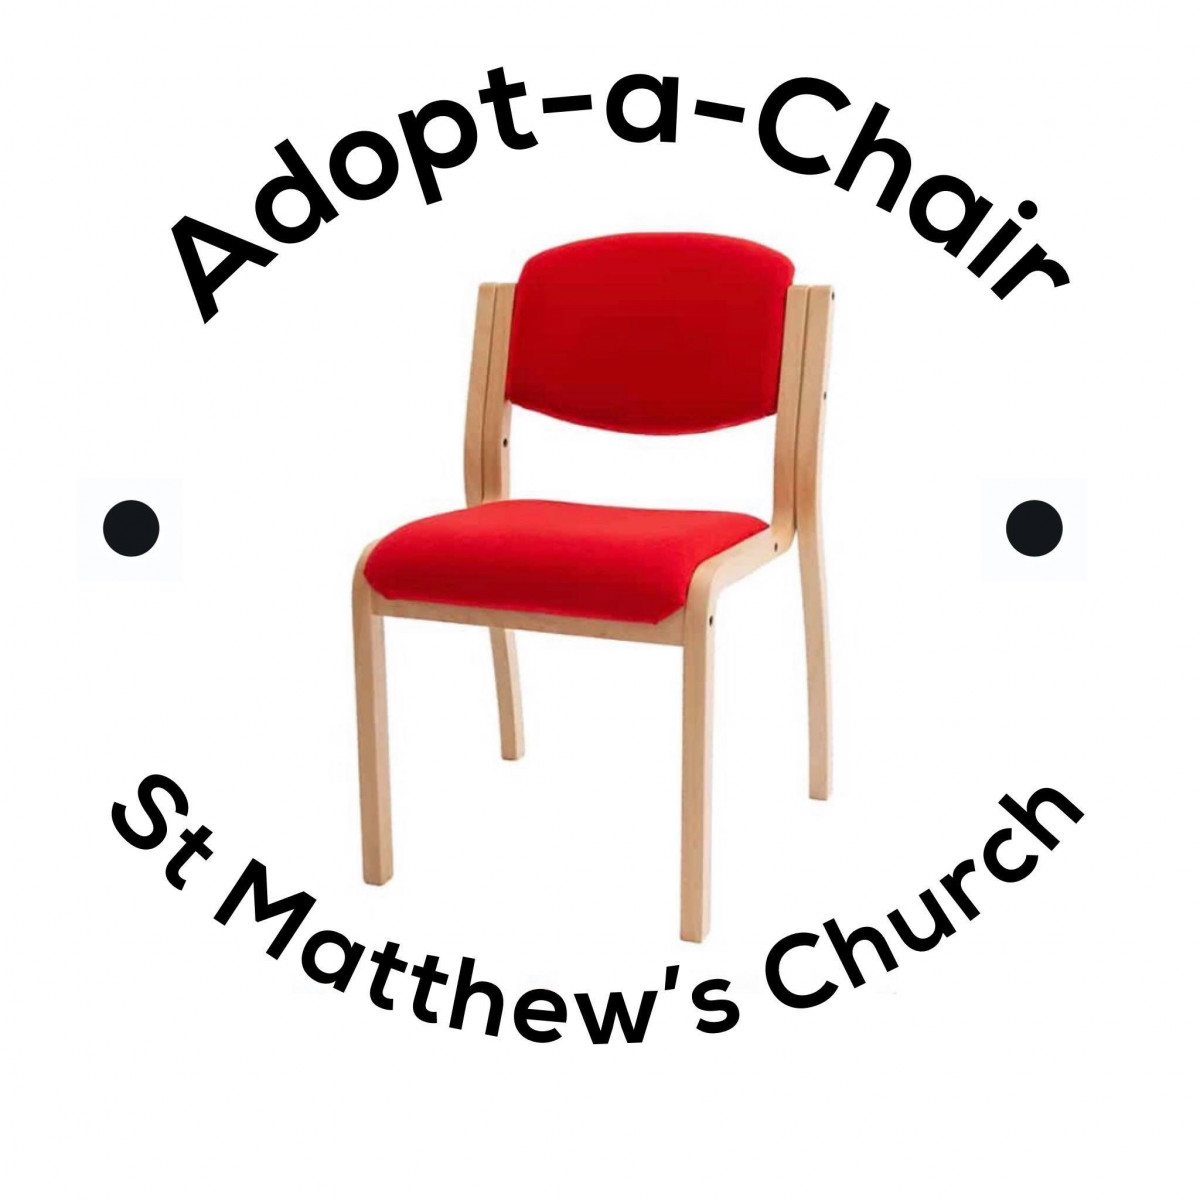 image of adopt a chair logo. a red chair with black writing saying adopt a chair st Matthew's church around it in a circle